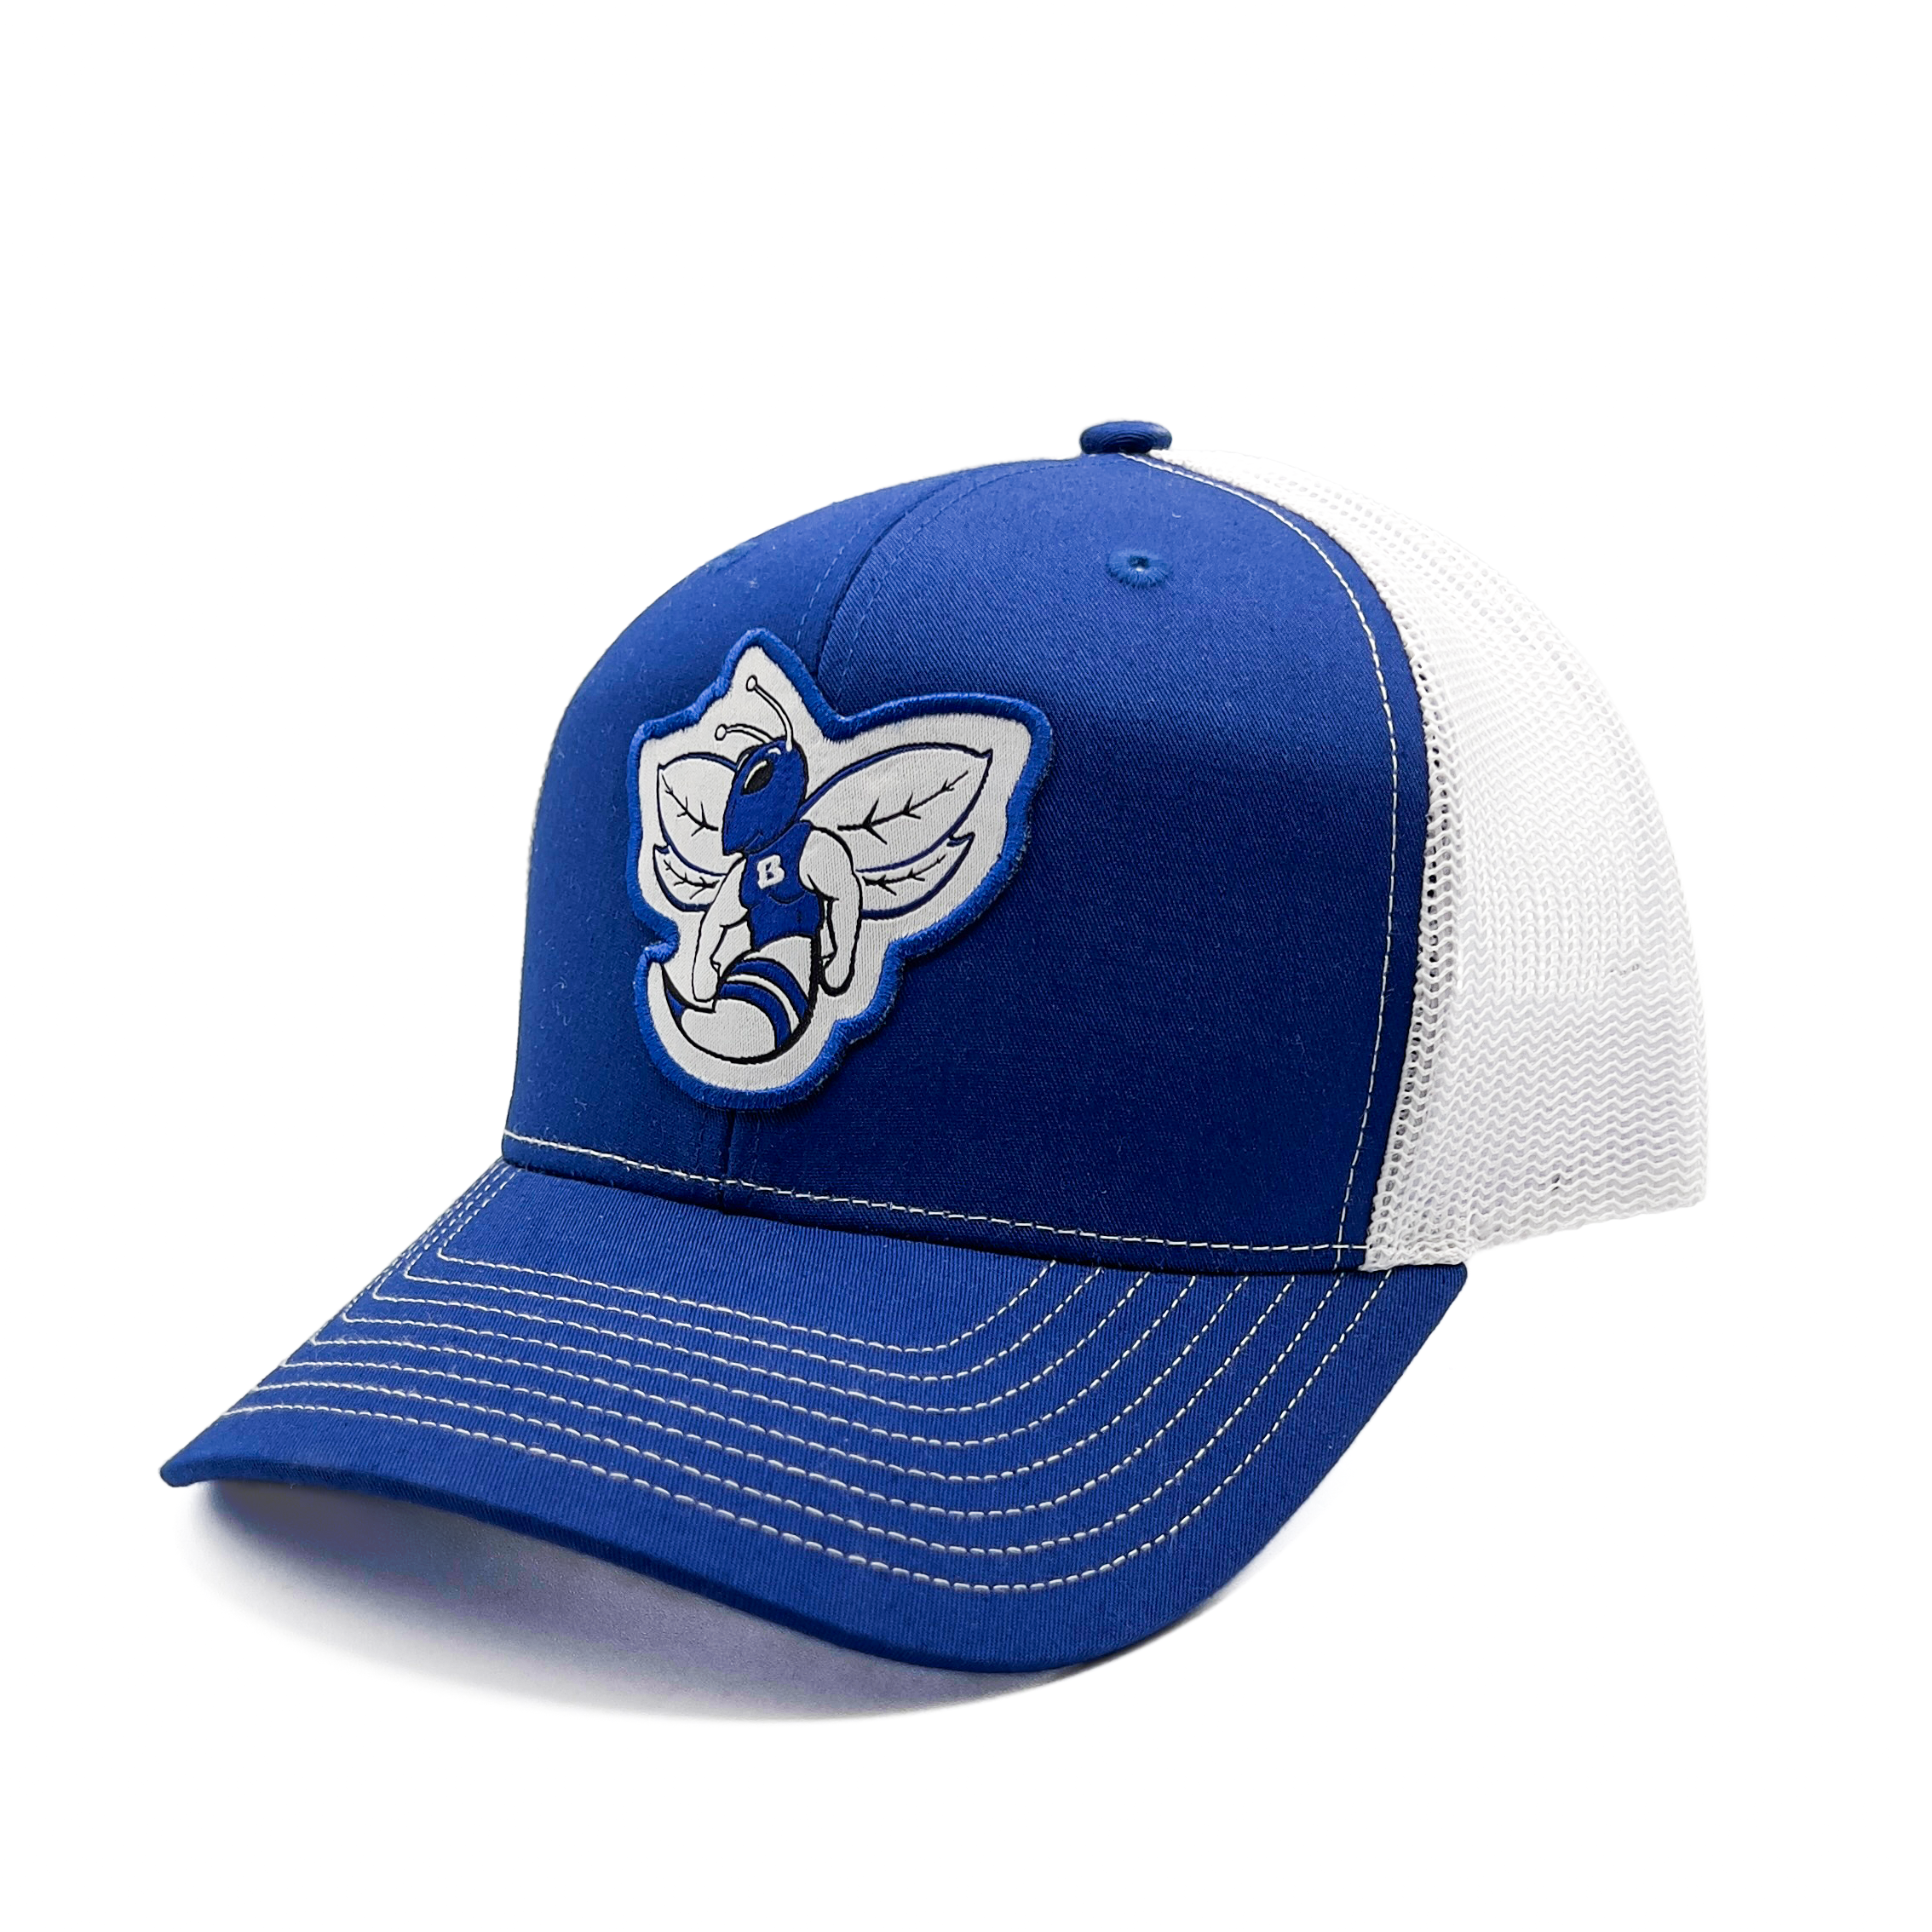 Bryant Hornets Patch Hat Navy